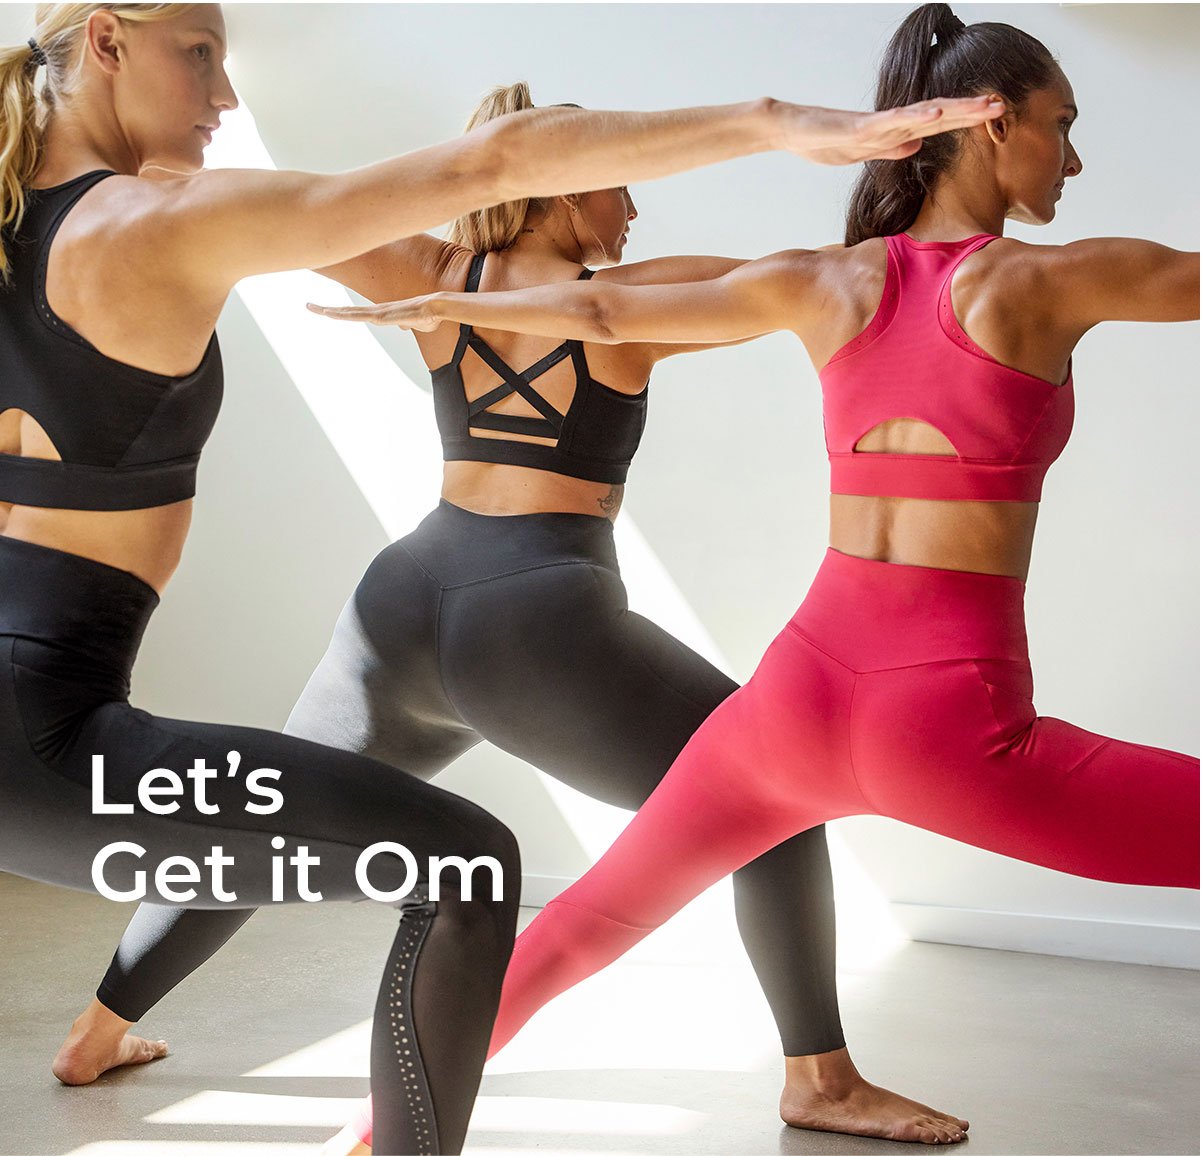 MPG Sport: Go with the Flow. Its International Yoga Day